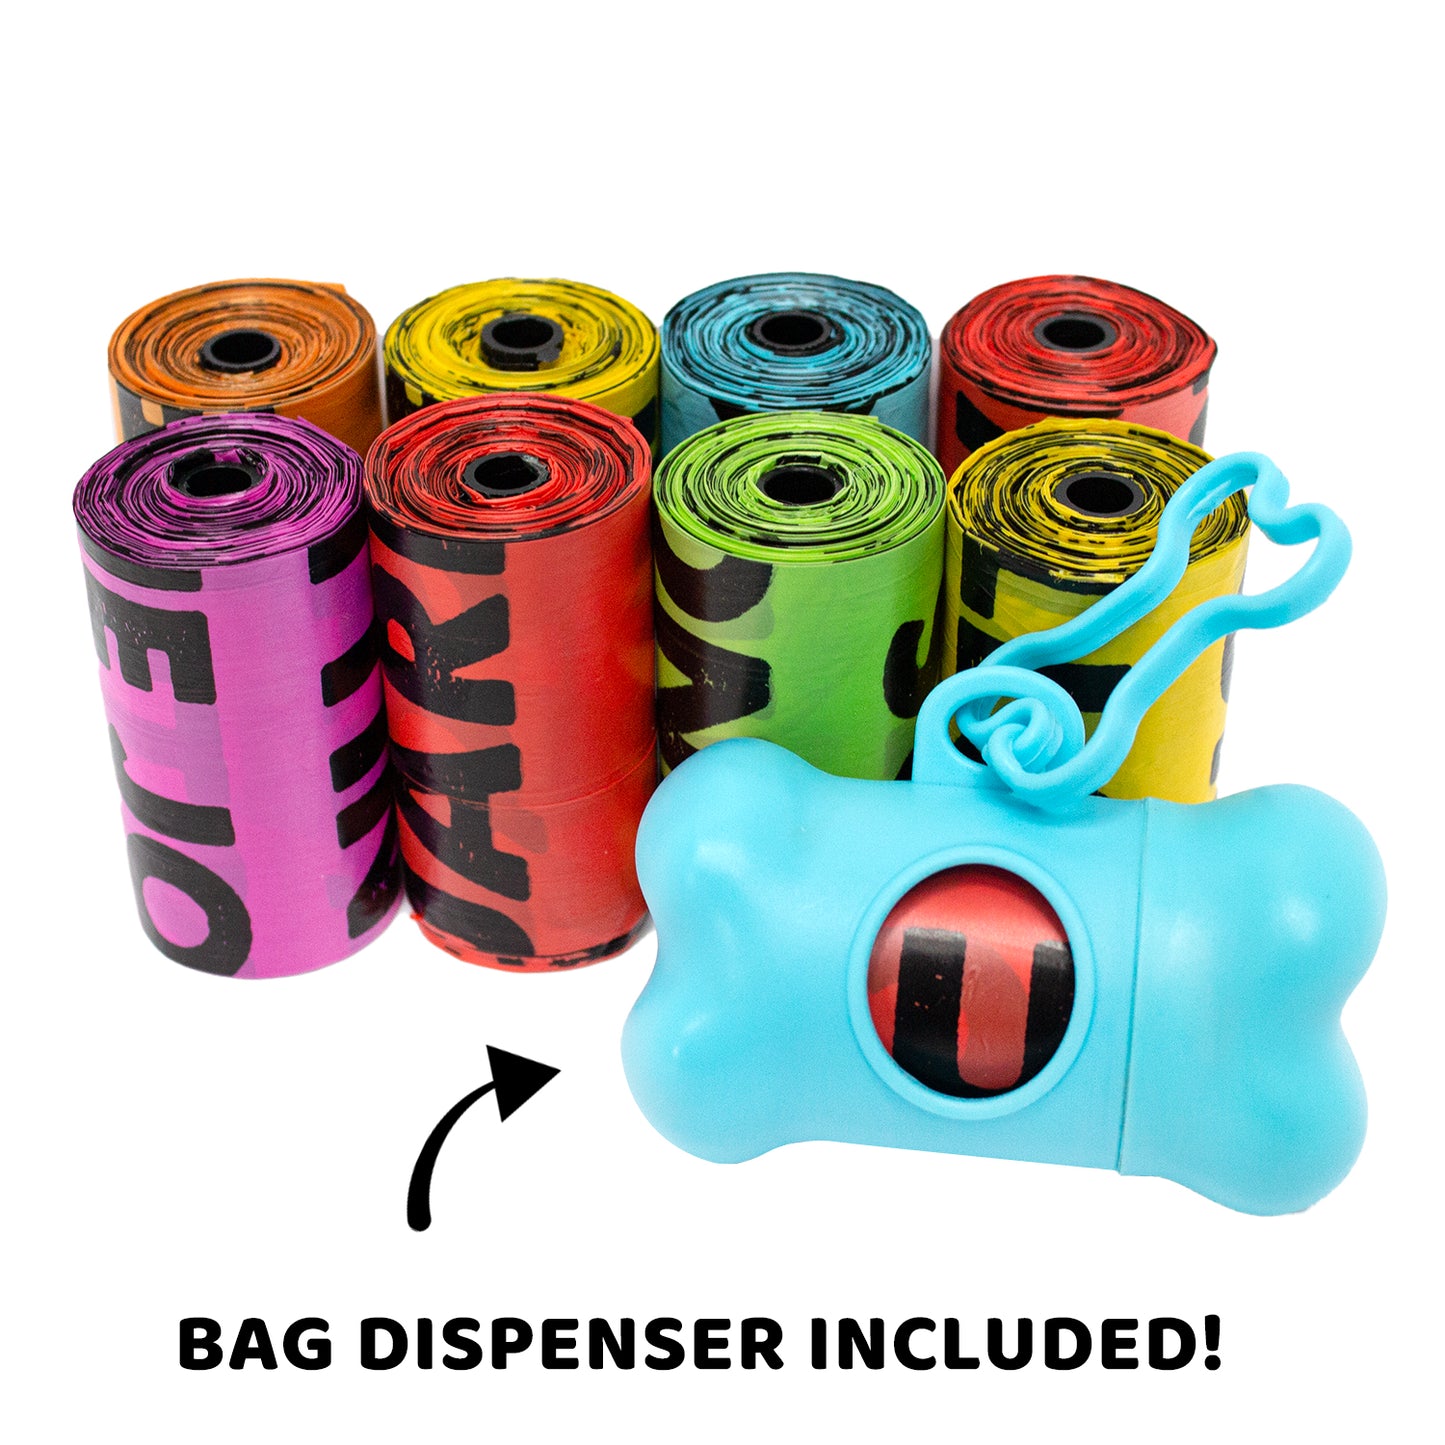 Fun Pet Dog Doggie Cat Poop Waste Bags for Large and Small Dogs, Refill Rolls with Poop Bag Dispenser Holder for Leash